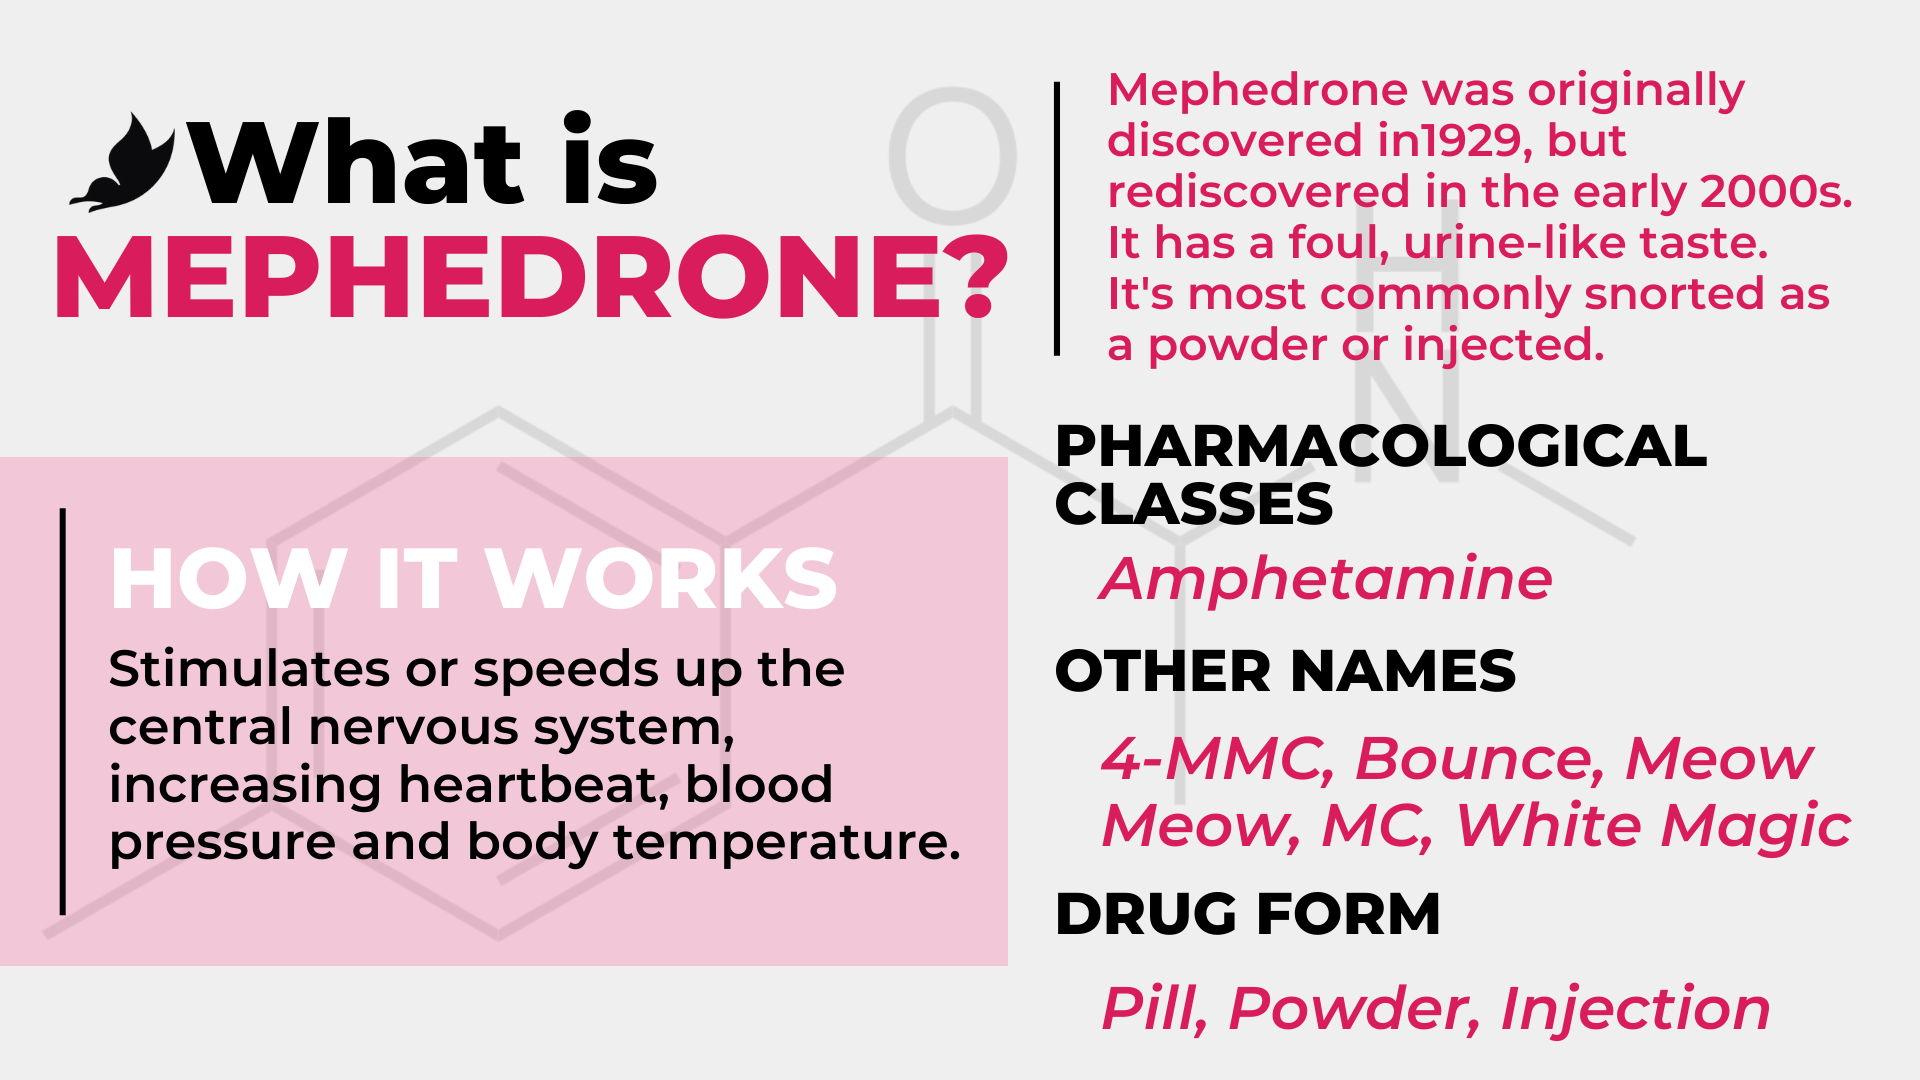 Infographic about Mephedrone